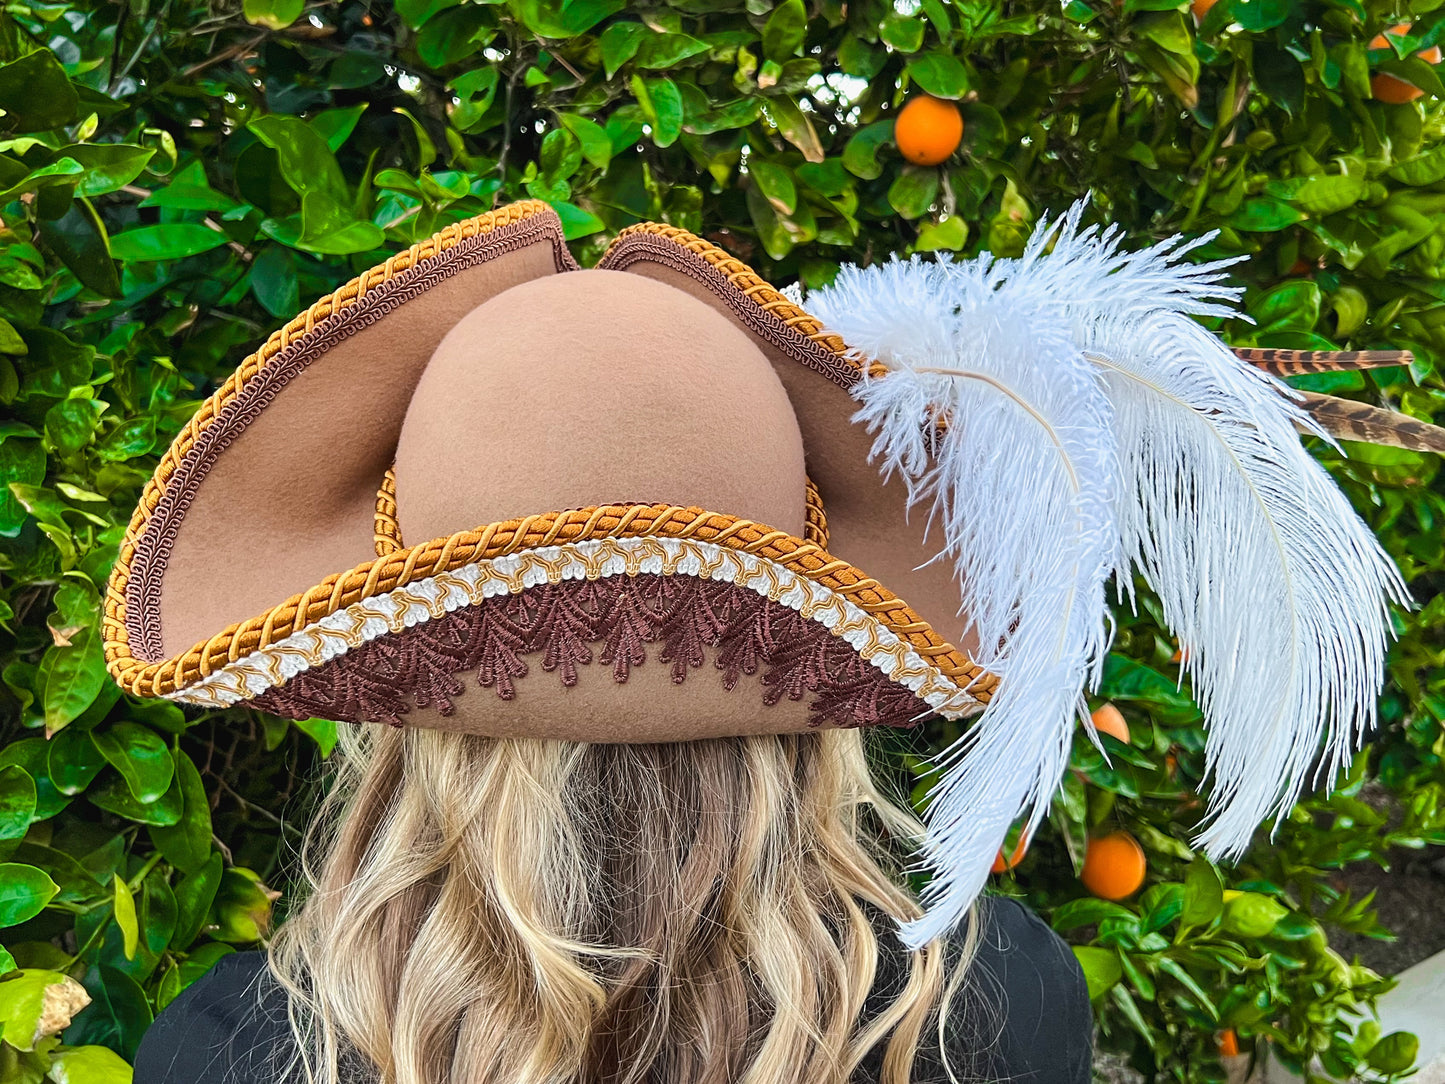 Tricorn Hat 22" Tan Wool Base with Brown Trim, Feathers, and Rhinestone Brooch